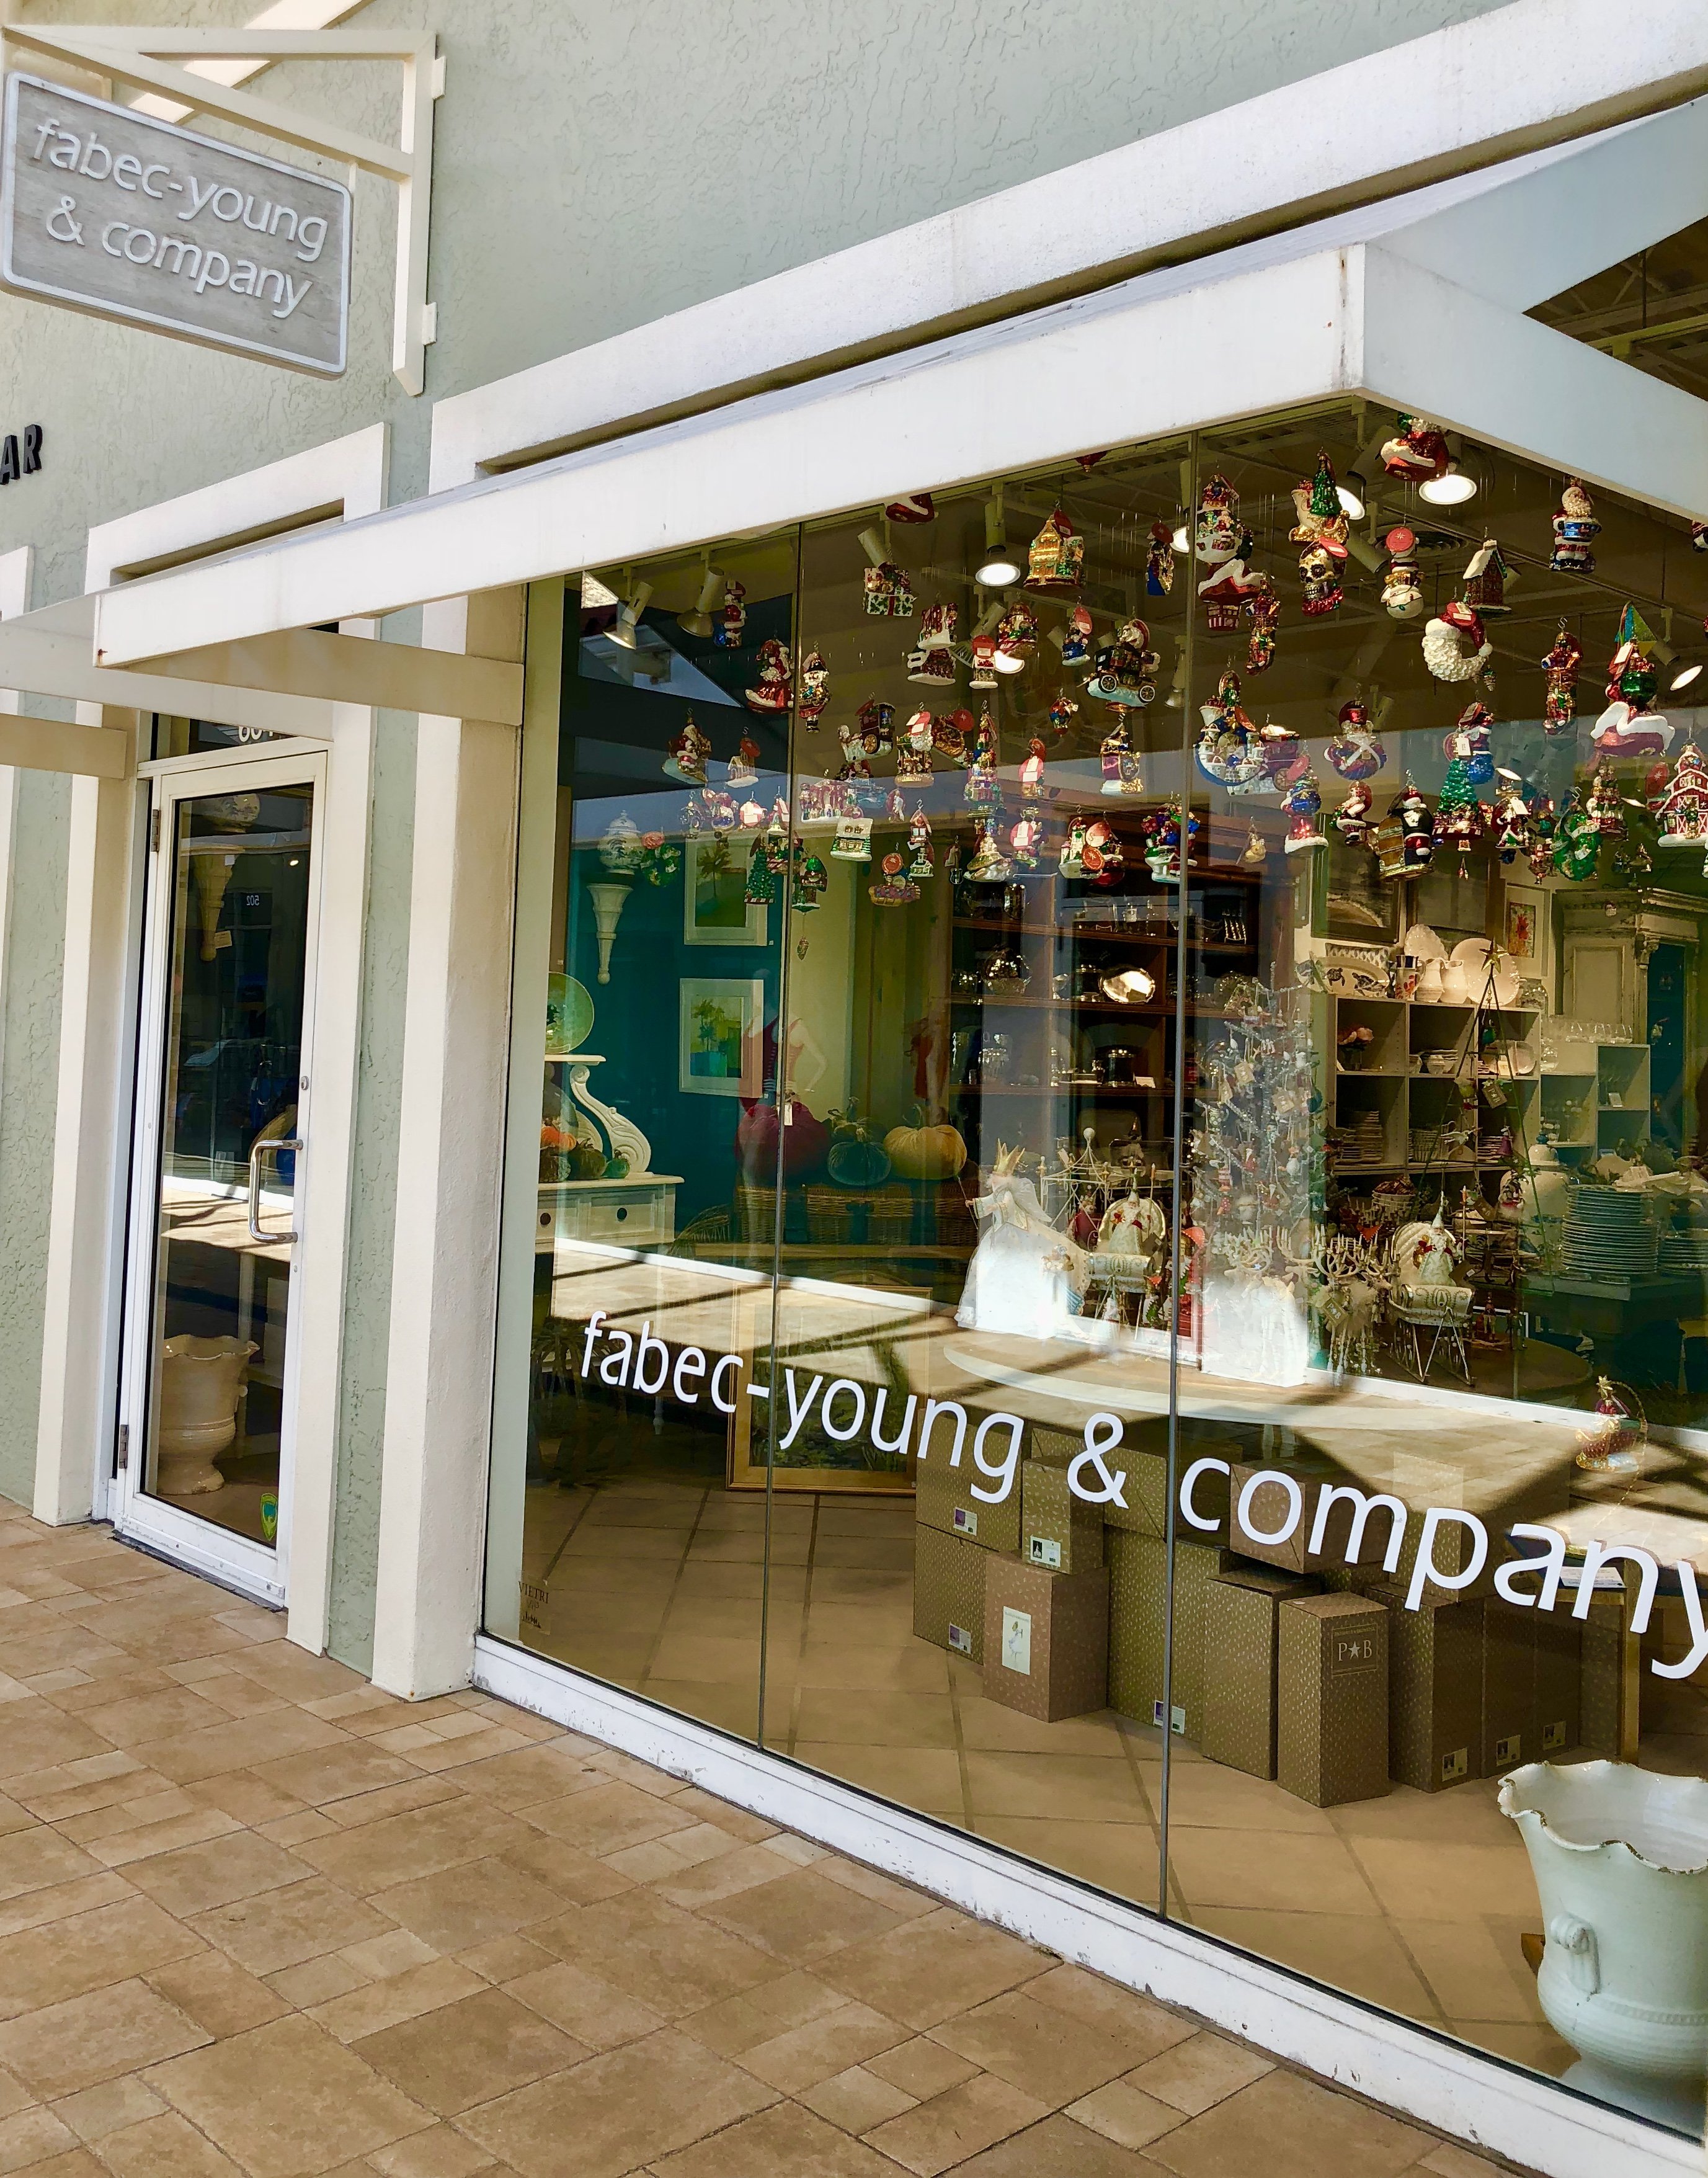 Fabec-Young & Company at The Village Shops on Venetian Bay